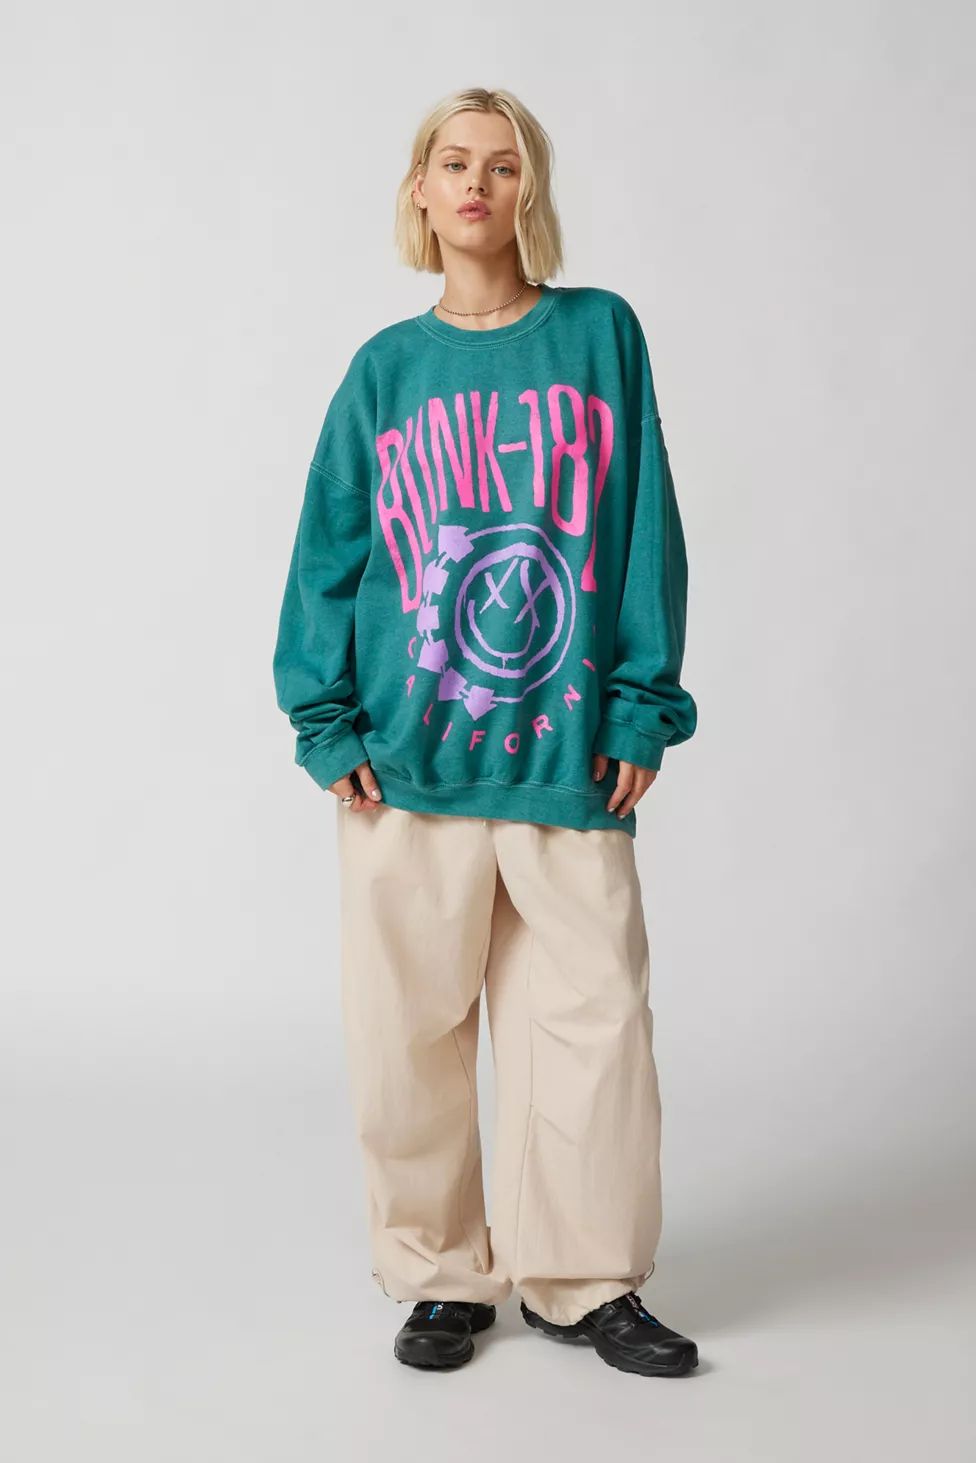 Blink 182 Punk Rock Sweatshirt | Urban Outfitters (US and RoW)